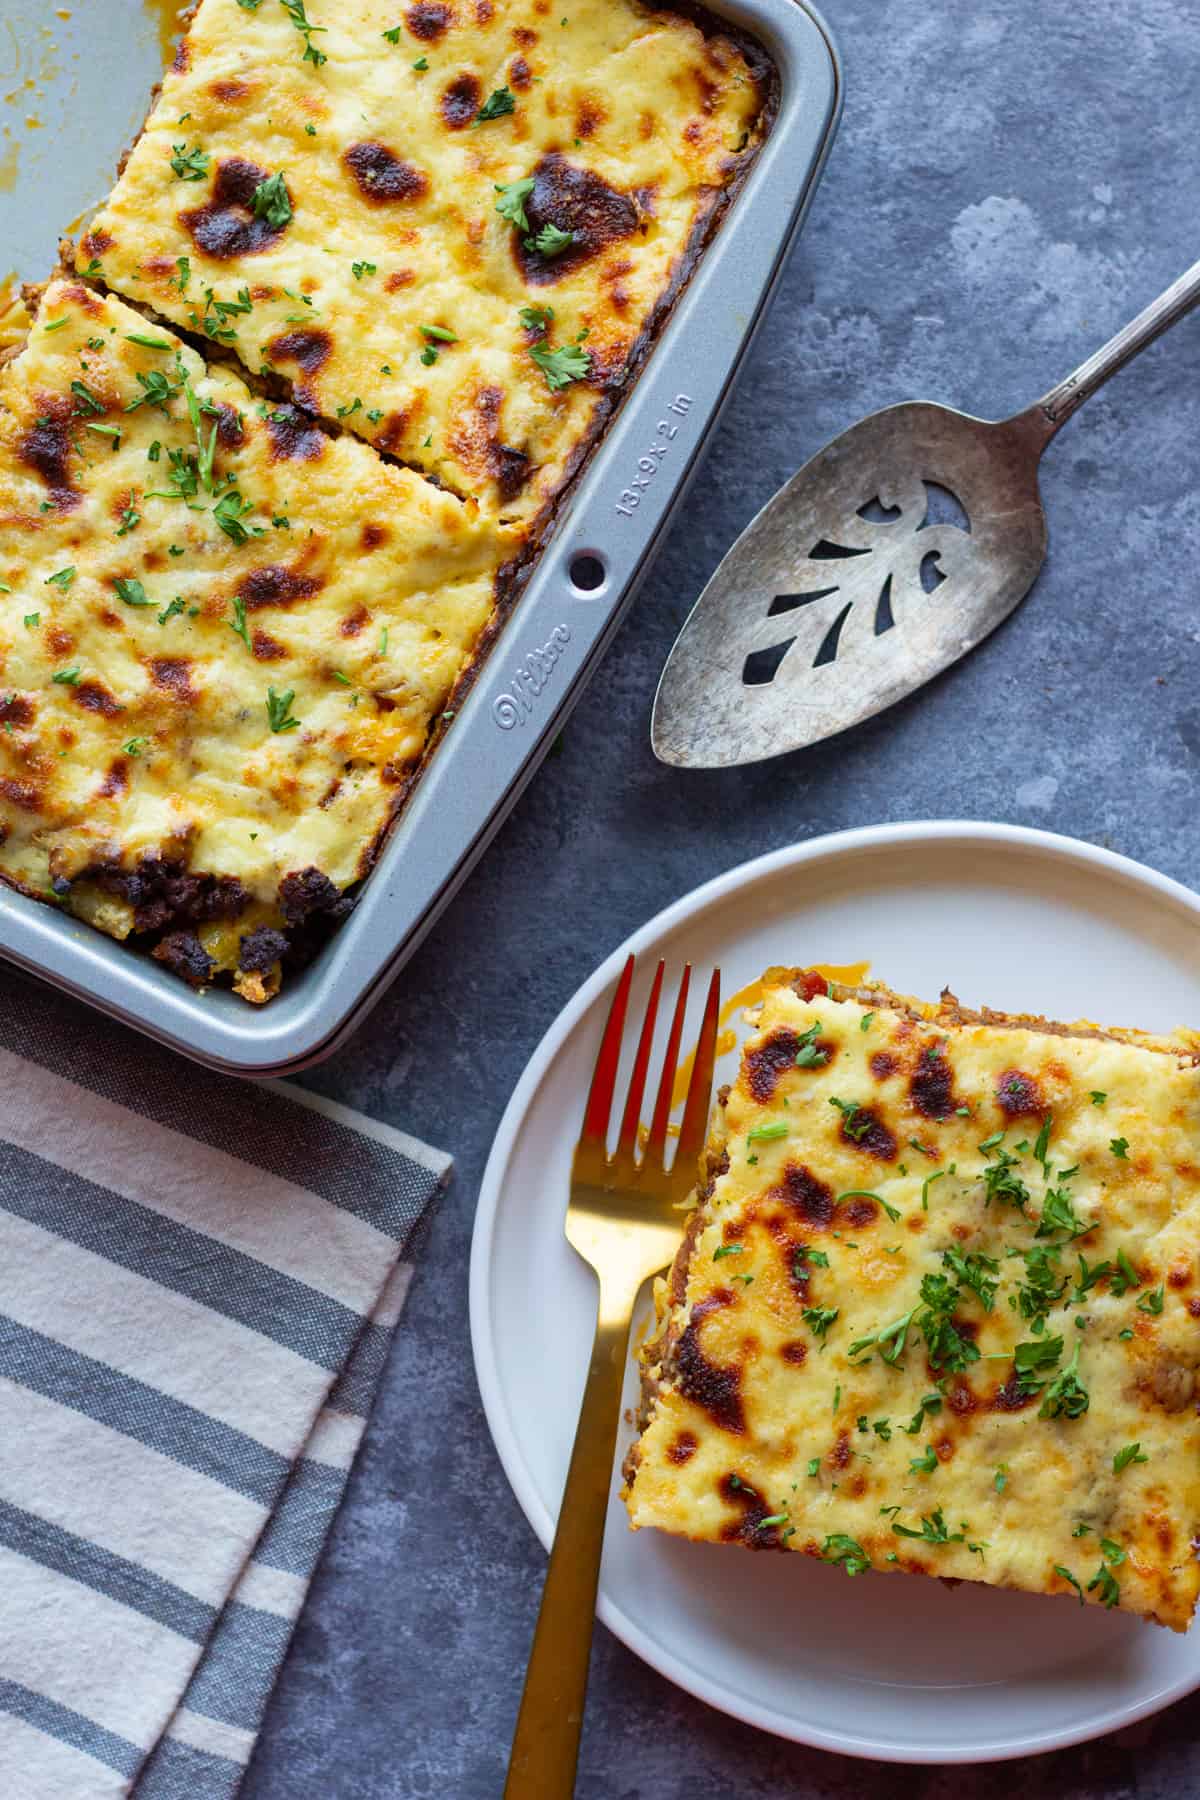 Let this Greek pasta bake cool before you slice it so the slices are clean. 